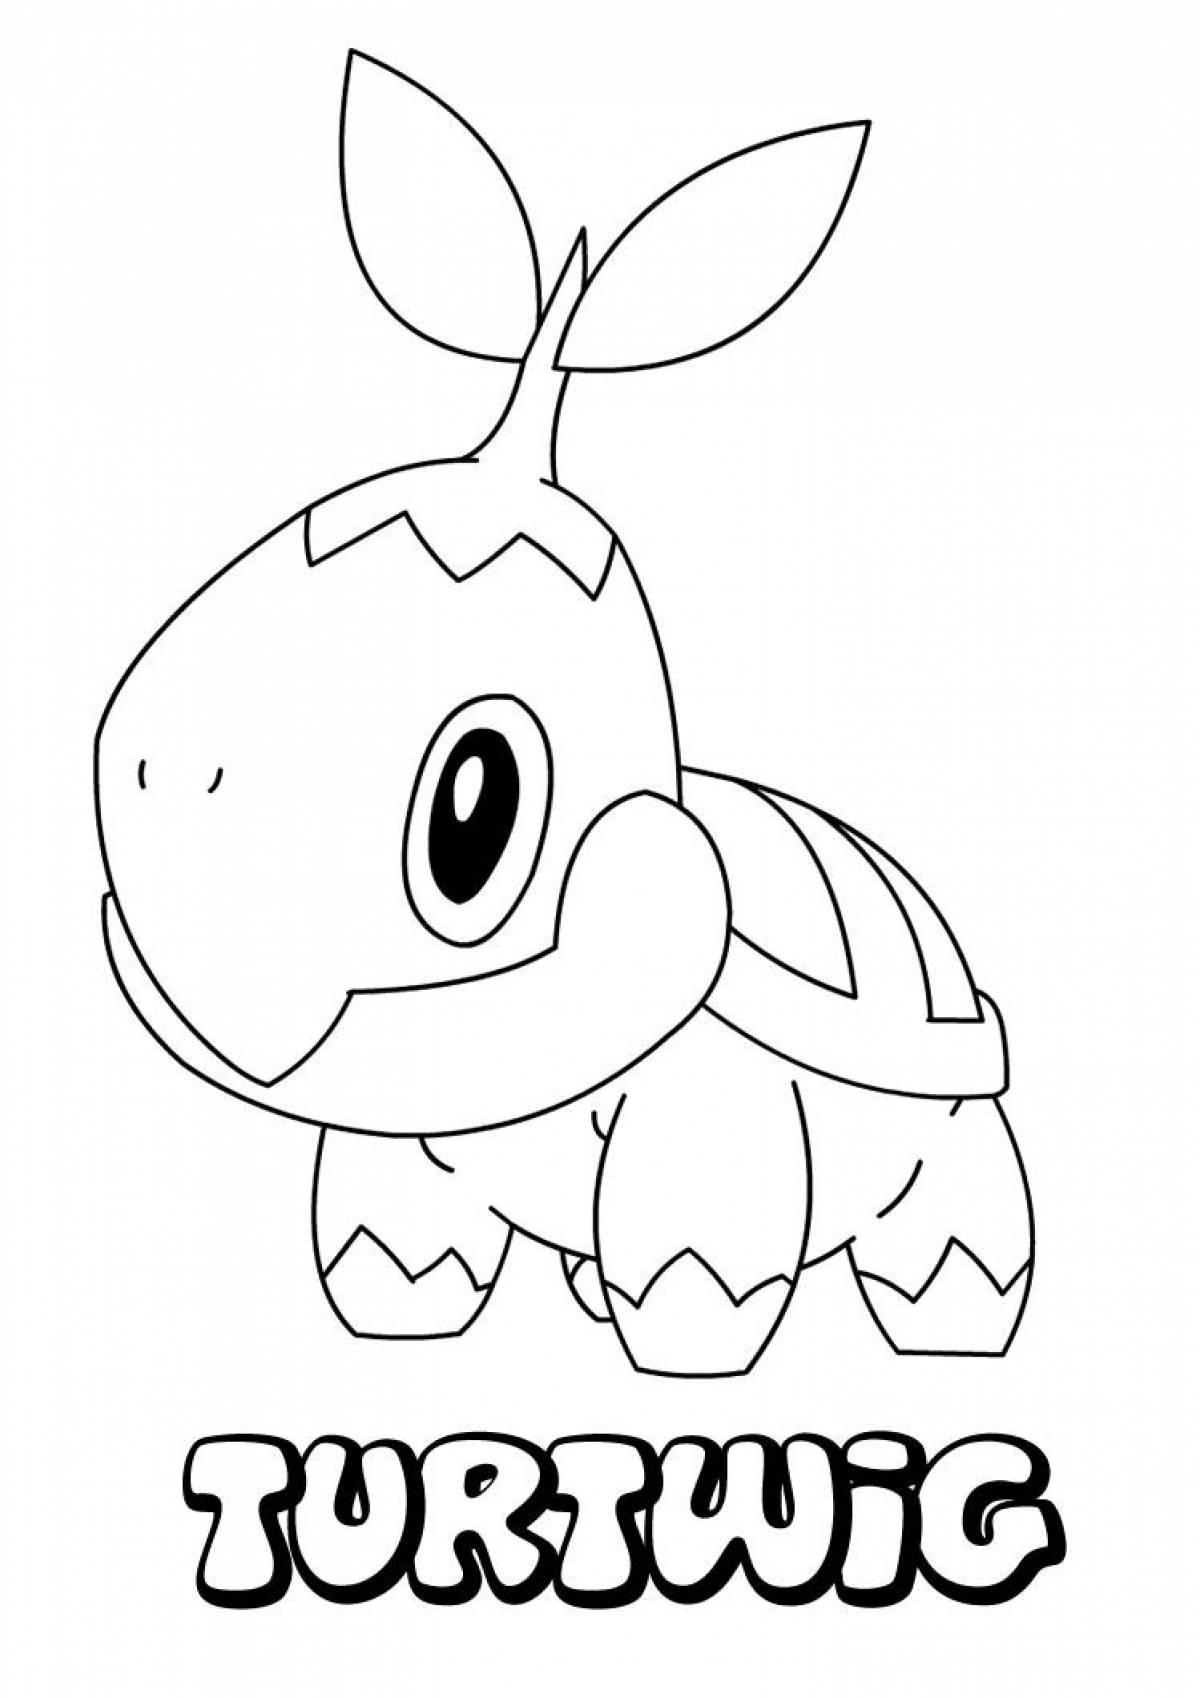 Intriguing Pokemon coloring book